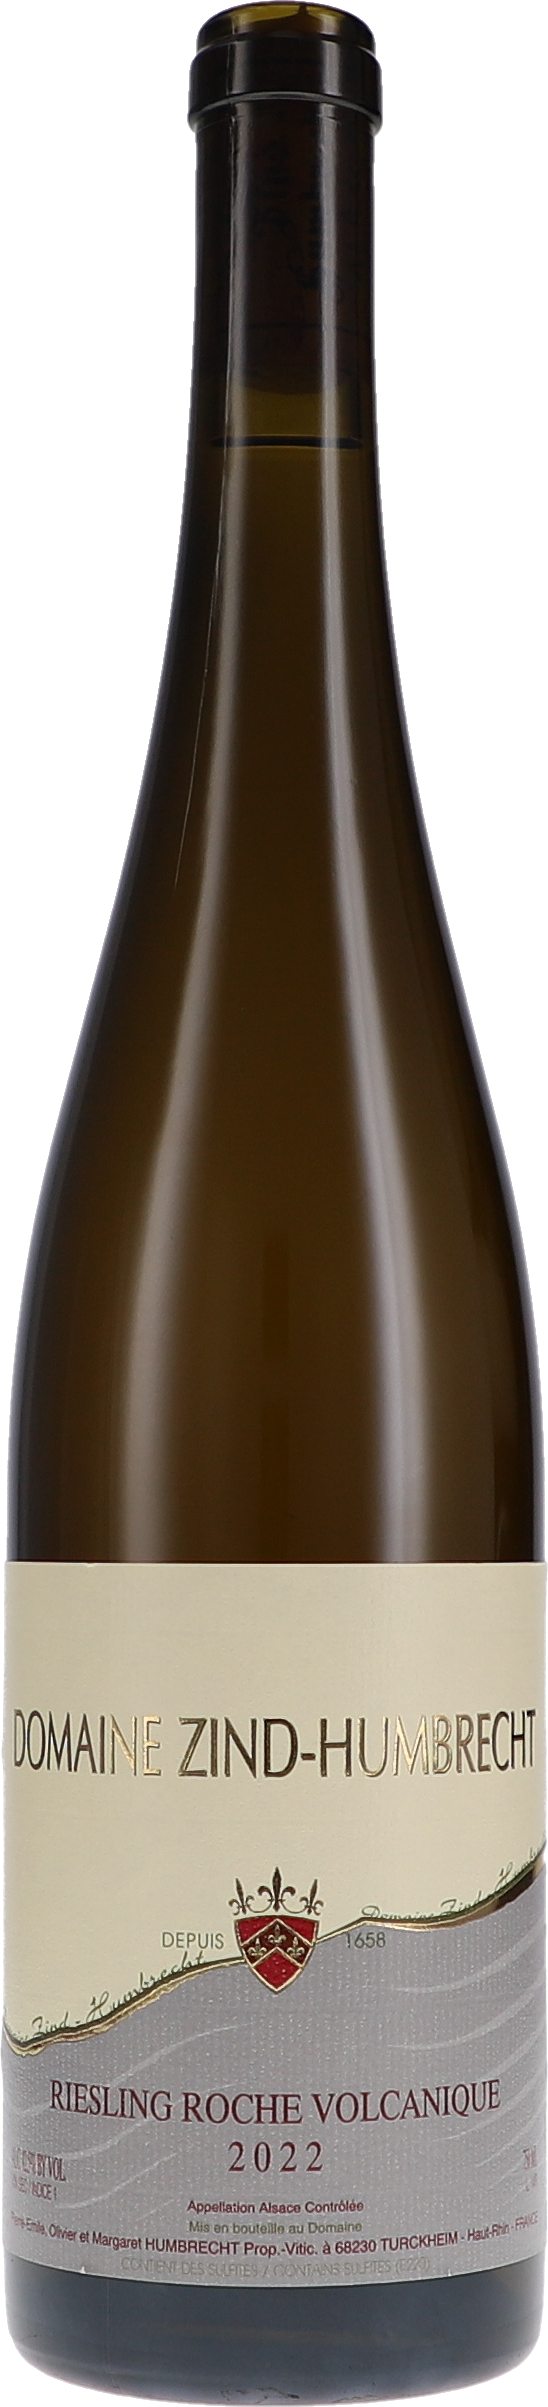 Riesling Roche Volcanique